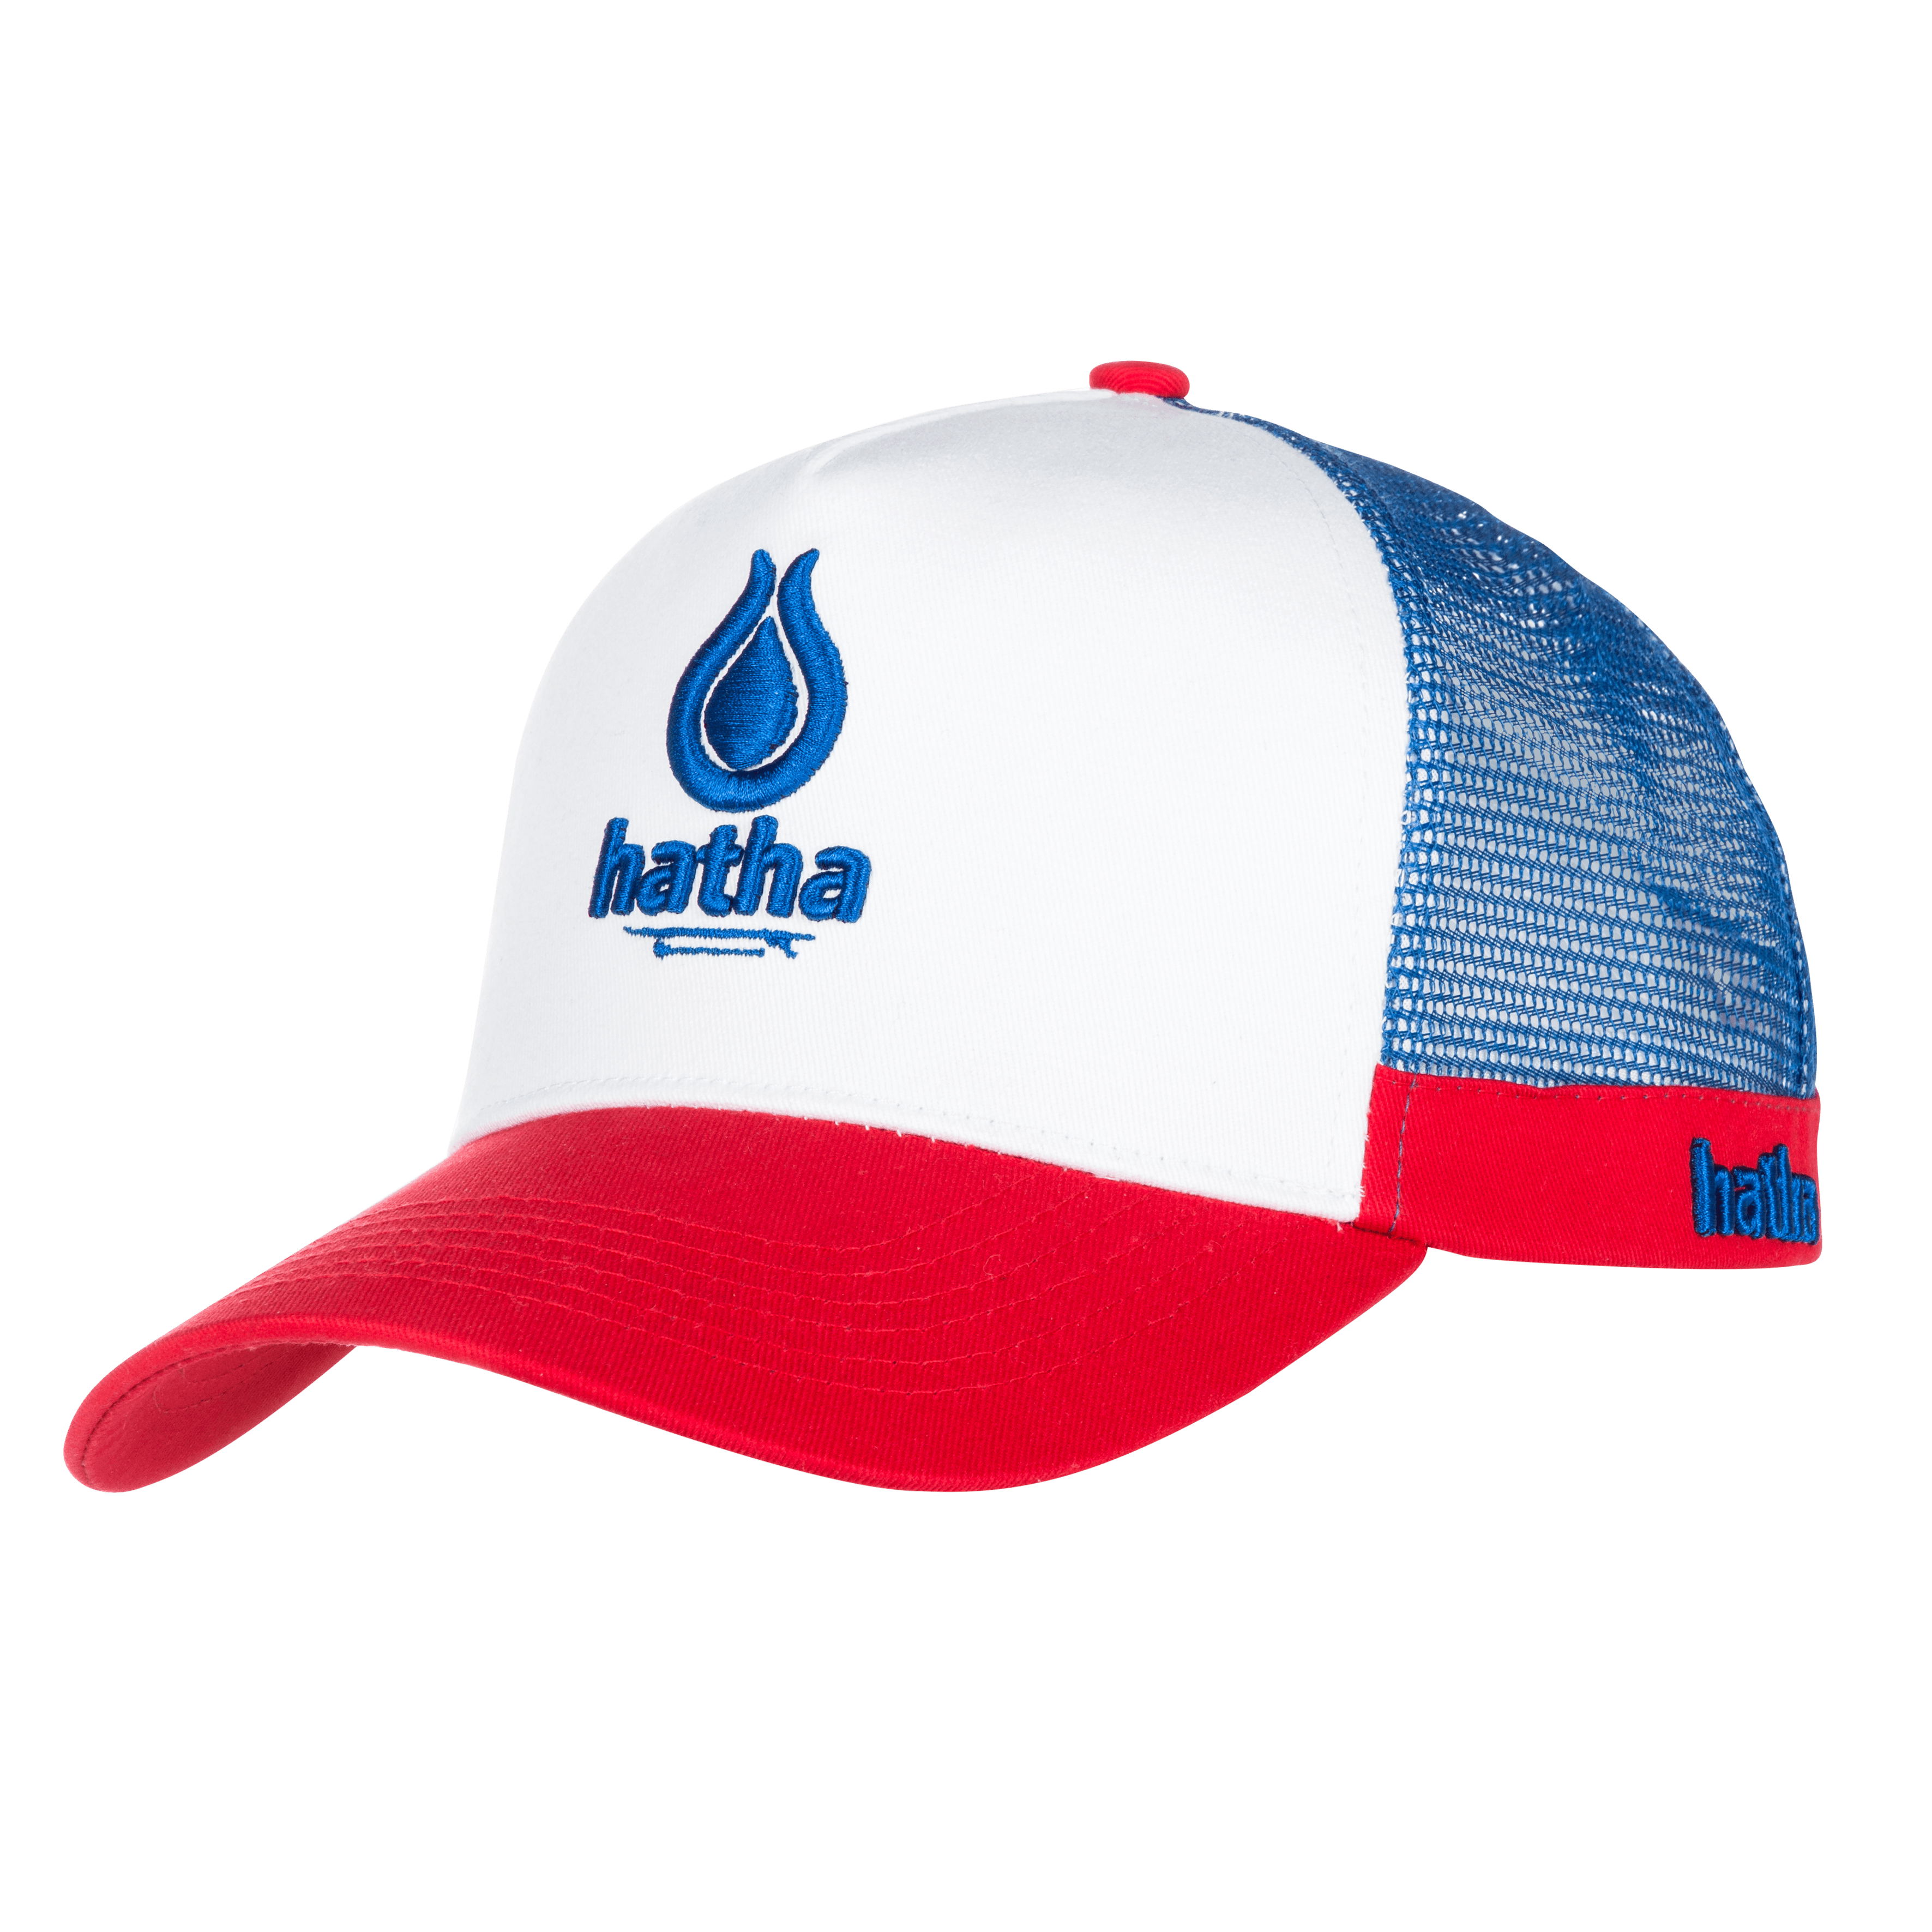 Red White and Blue Clothing Logo - Hatha Trucker Cap - red/white/blue - hathaboards